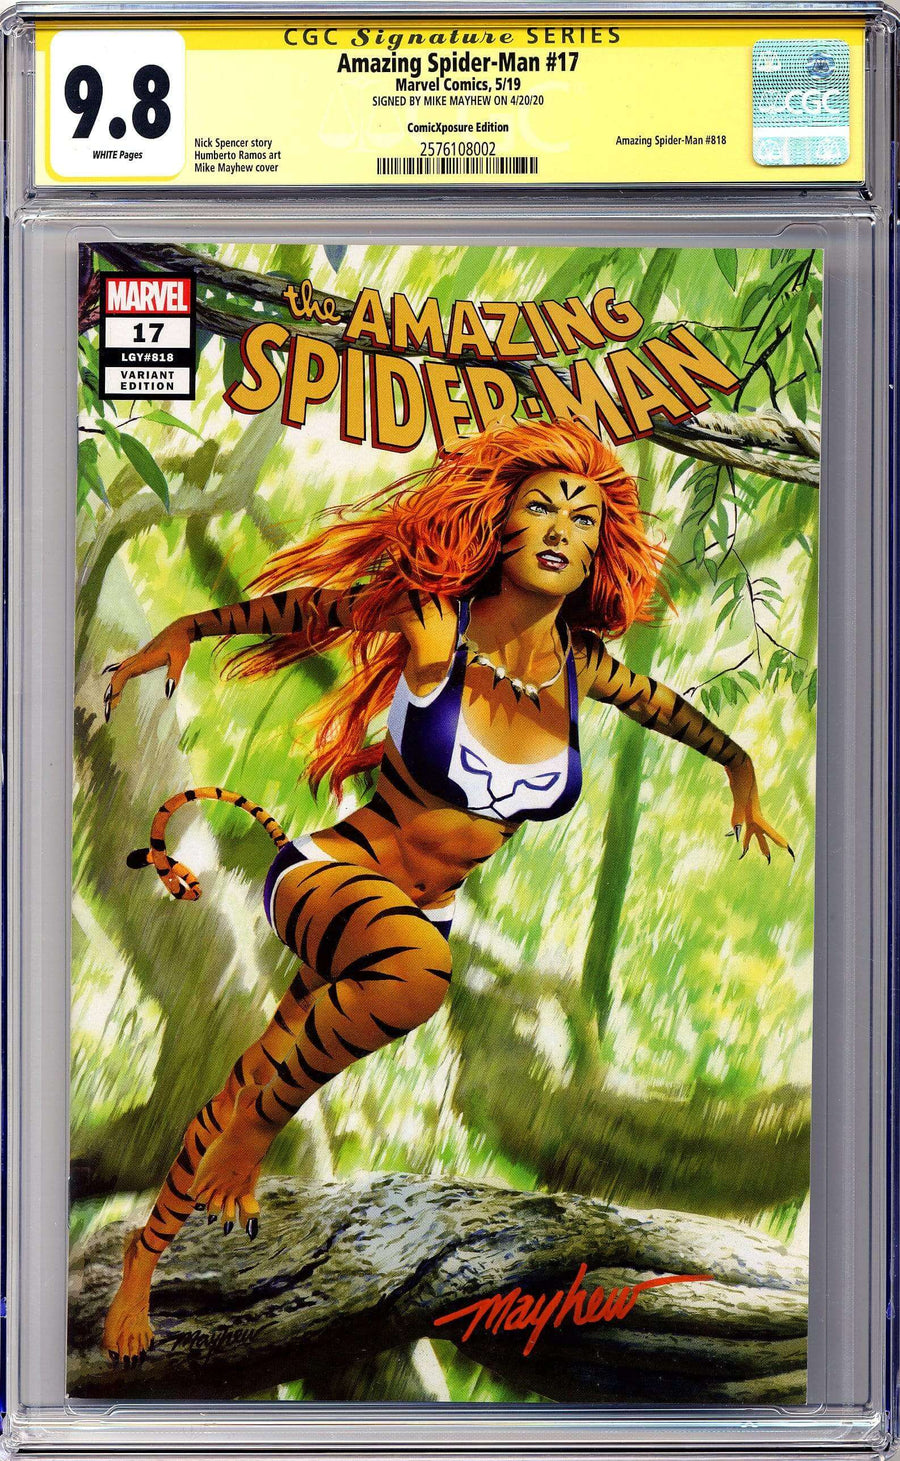 AMAZING SPIDER-MAN #17 Cover A Trade Dress CGC 9.8 Yellow Label Signature Series